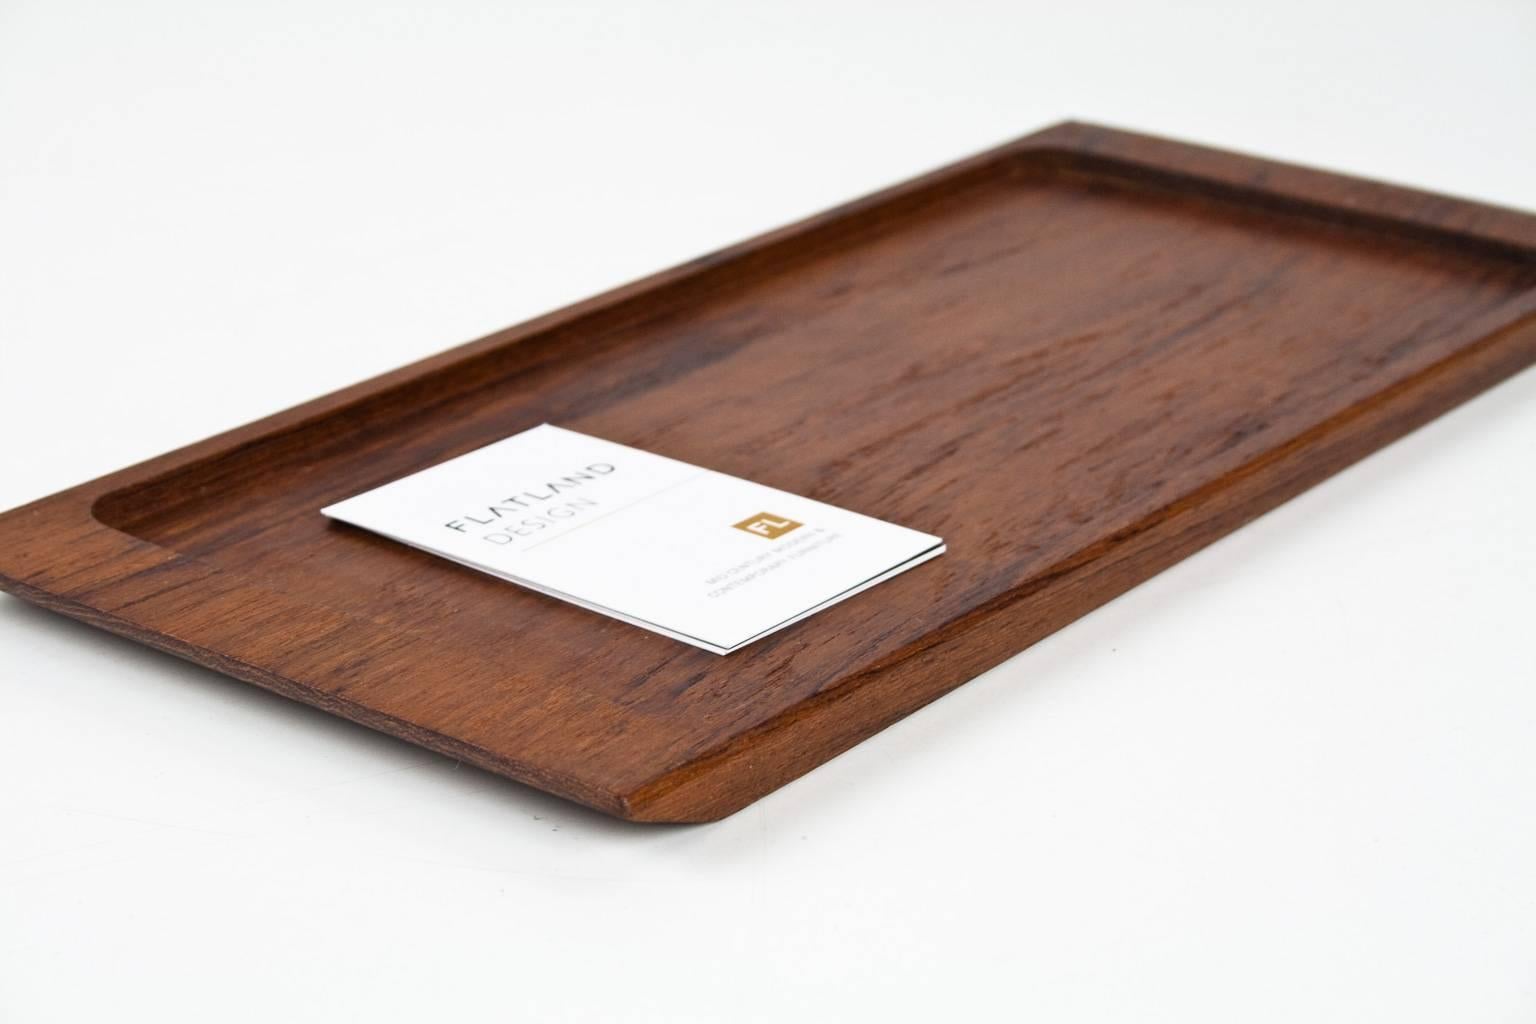 1960s Midcentury Danish Solid Wooden Teak Desk Accessory or Table Tray In Excellent Condition For Sale In Beek en Donk, NL